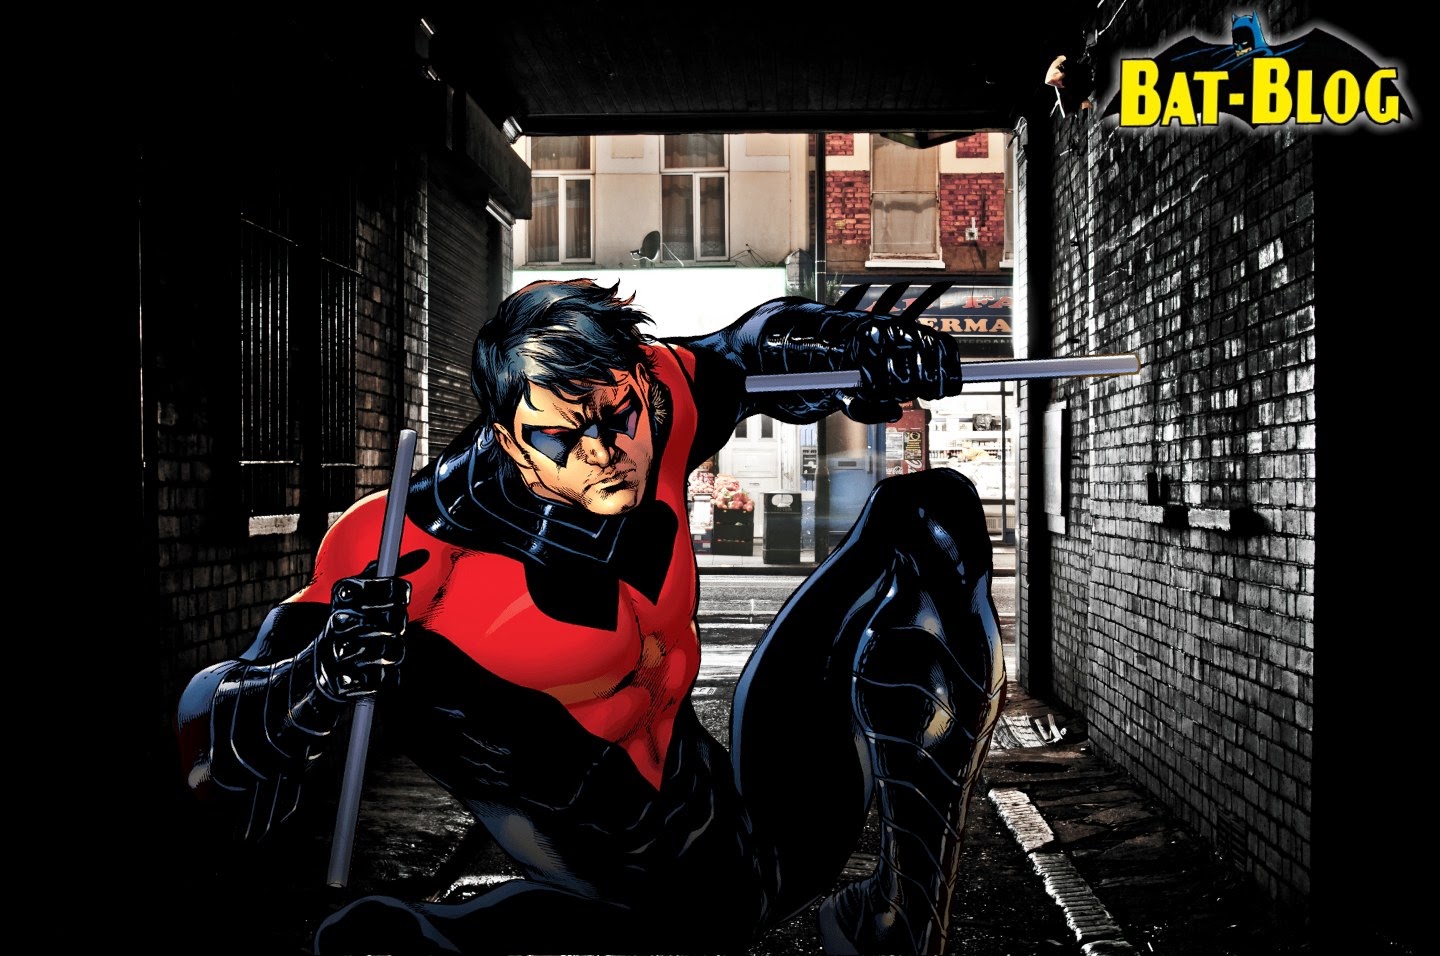 BAT - BLOG : BATMAN TOYS and COLLECTIBLES: New BATMAN COMIC BOOK WALLPAPERS  - Nightwing and Deadshot